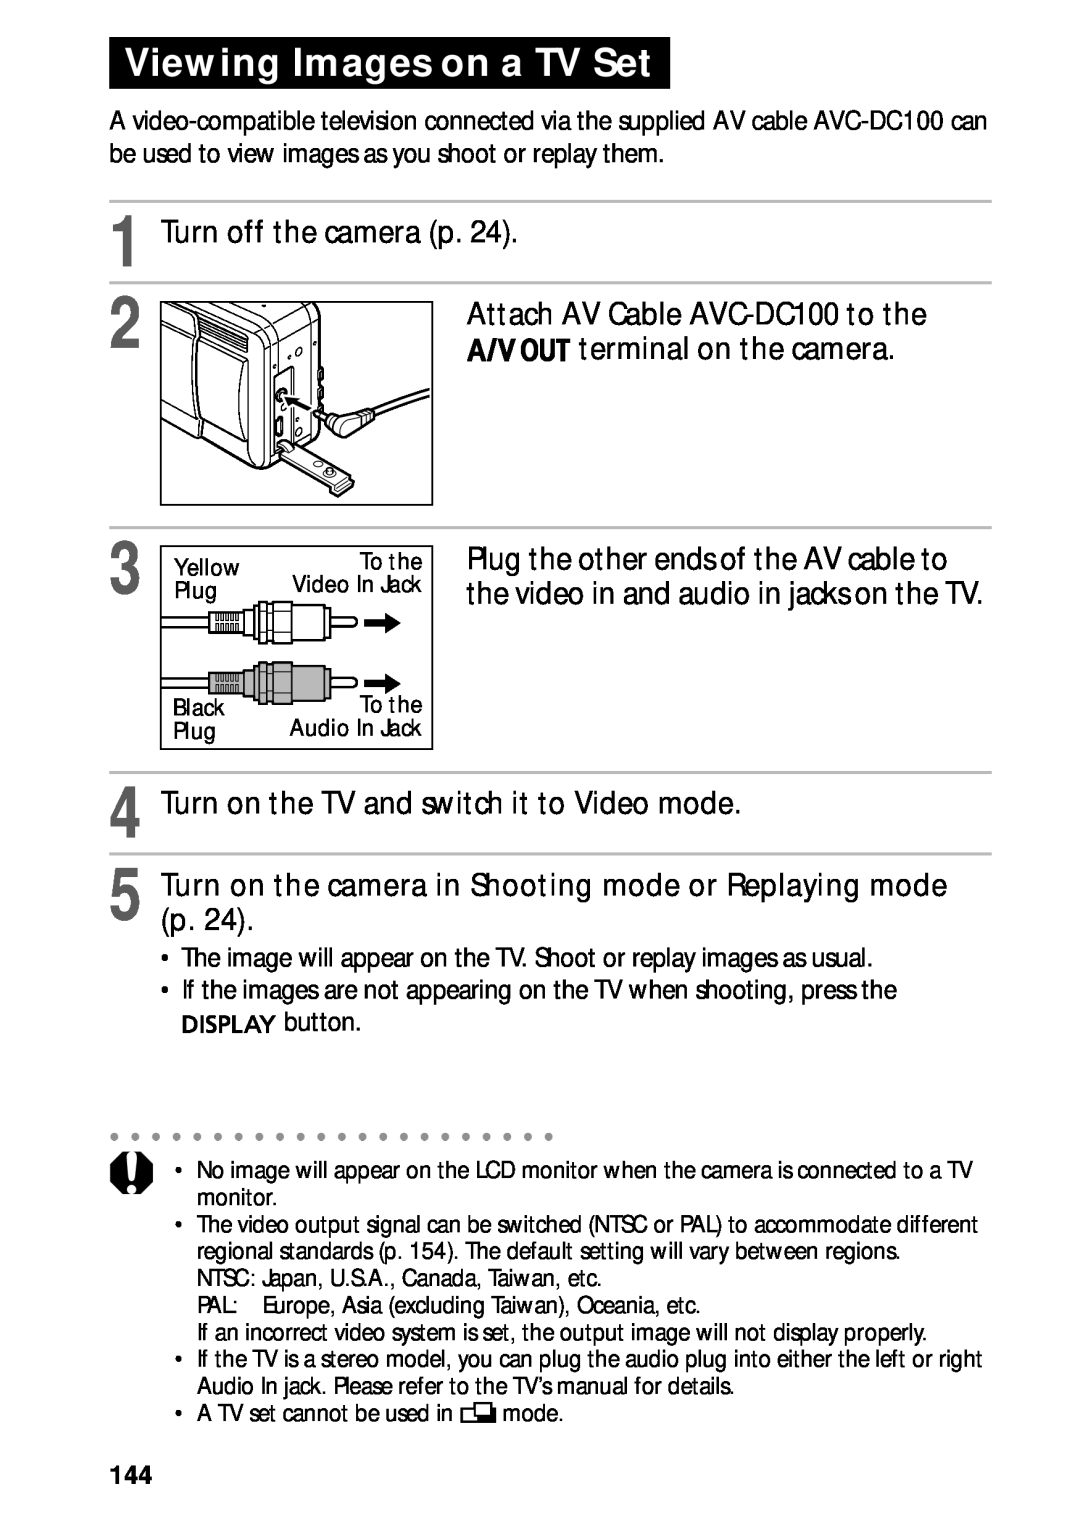 Canon PowerShot S45 manual Viewing Images on a TV Set, terminal on the camera, Turn on the TV and switch it to Video mode 